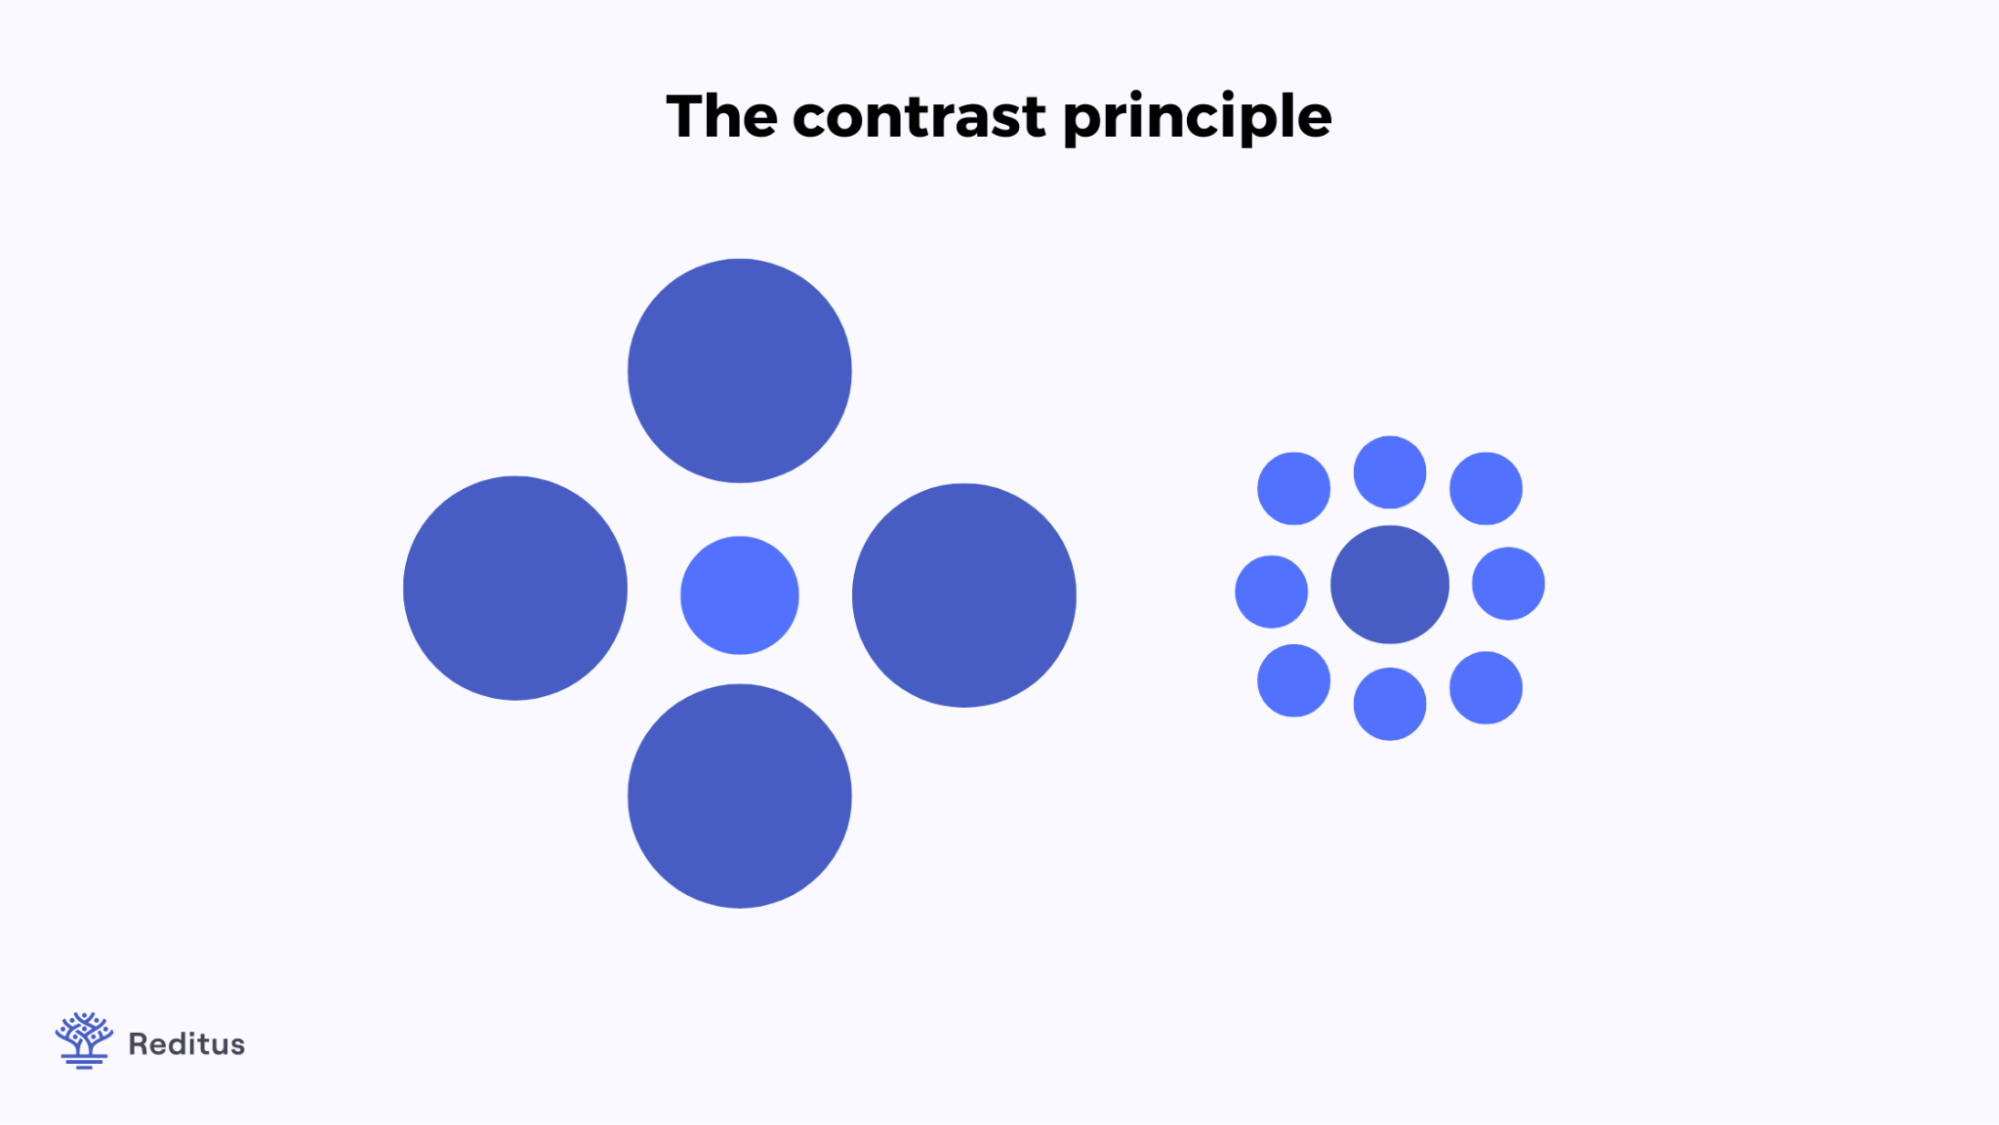 visual about the contrast principle 